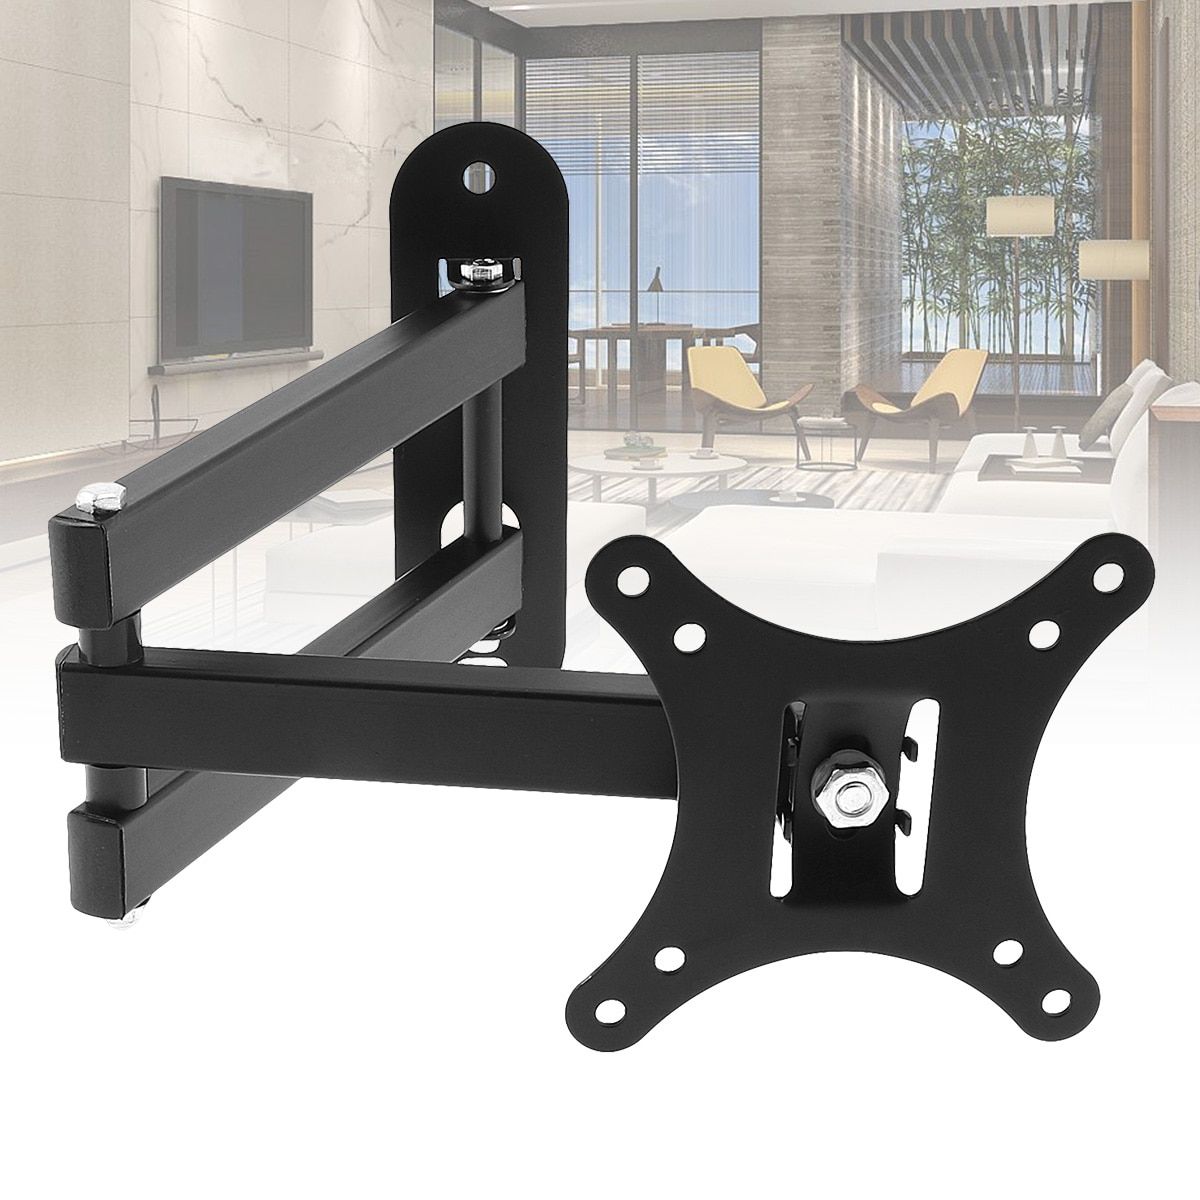 Aliexpress : Buy Universal 10kg Adjustable Tv Wall Pertaining To Wall Mounted Tv Stands For Flat Screens (View 14 of 15)